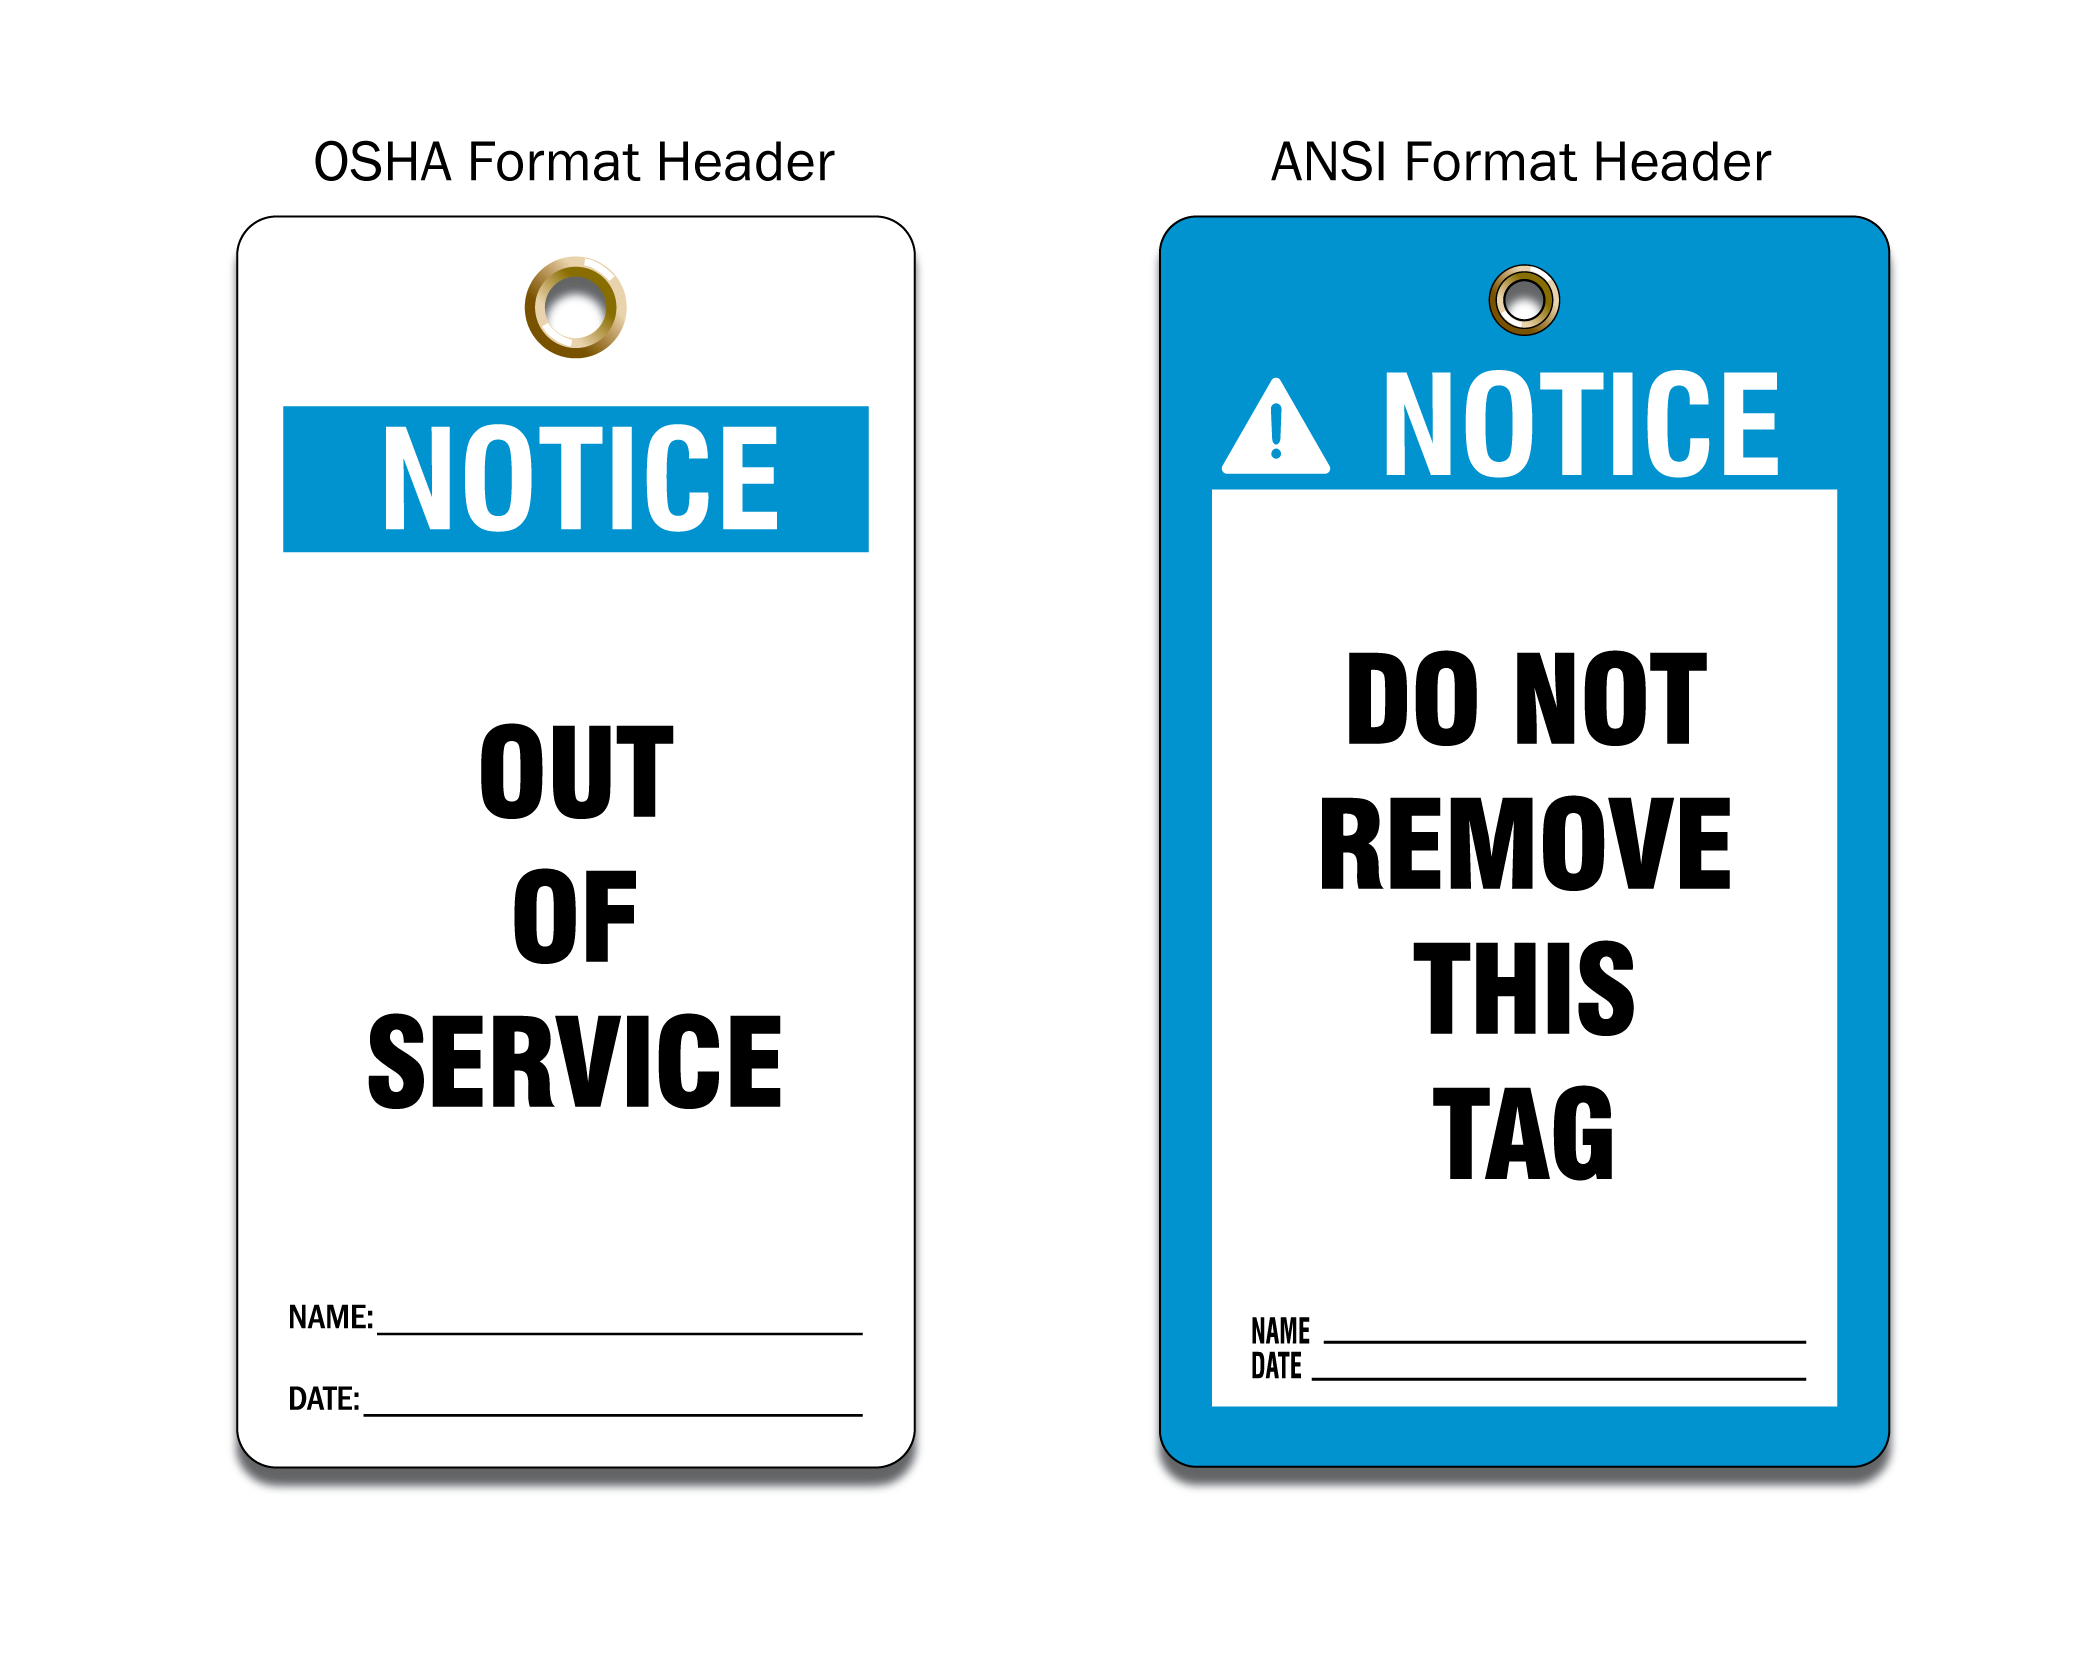 An image of two rectangular Notice tags with black text on blue and white backgrounds. One tag is OSHA format and the other is ANSI format.